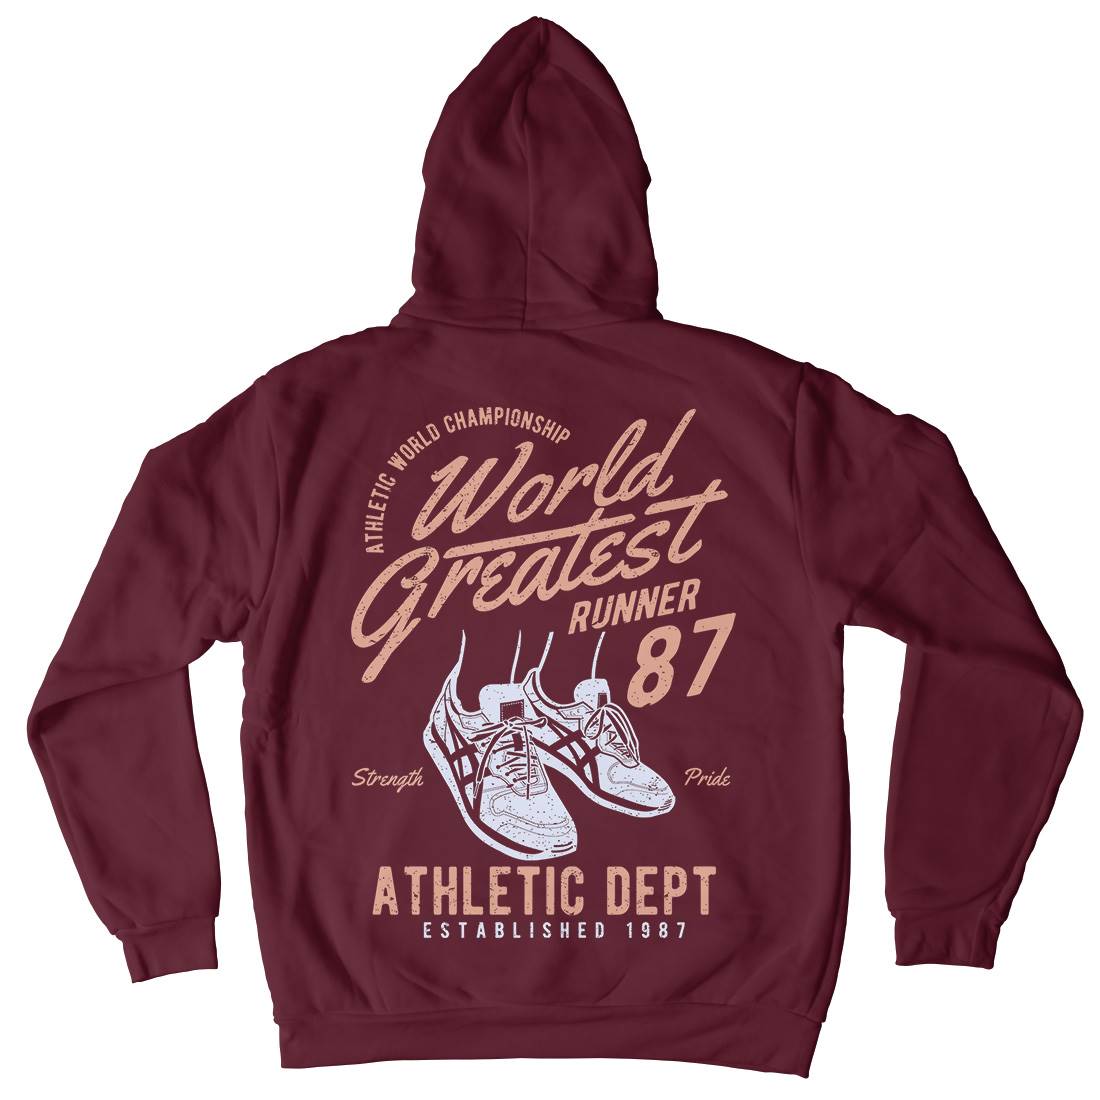 World Greatest Runner Mens Hoodie With Pocket Sport A200